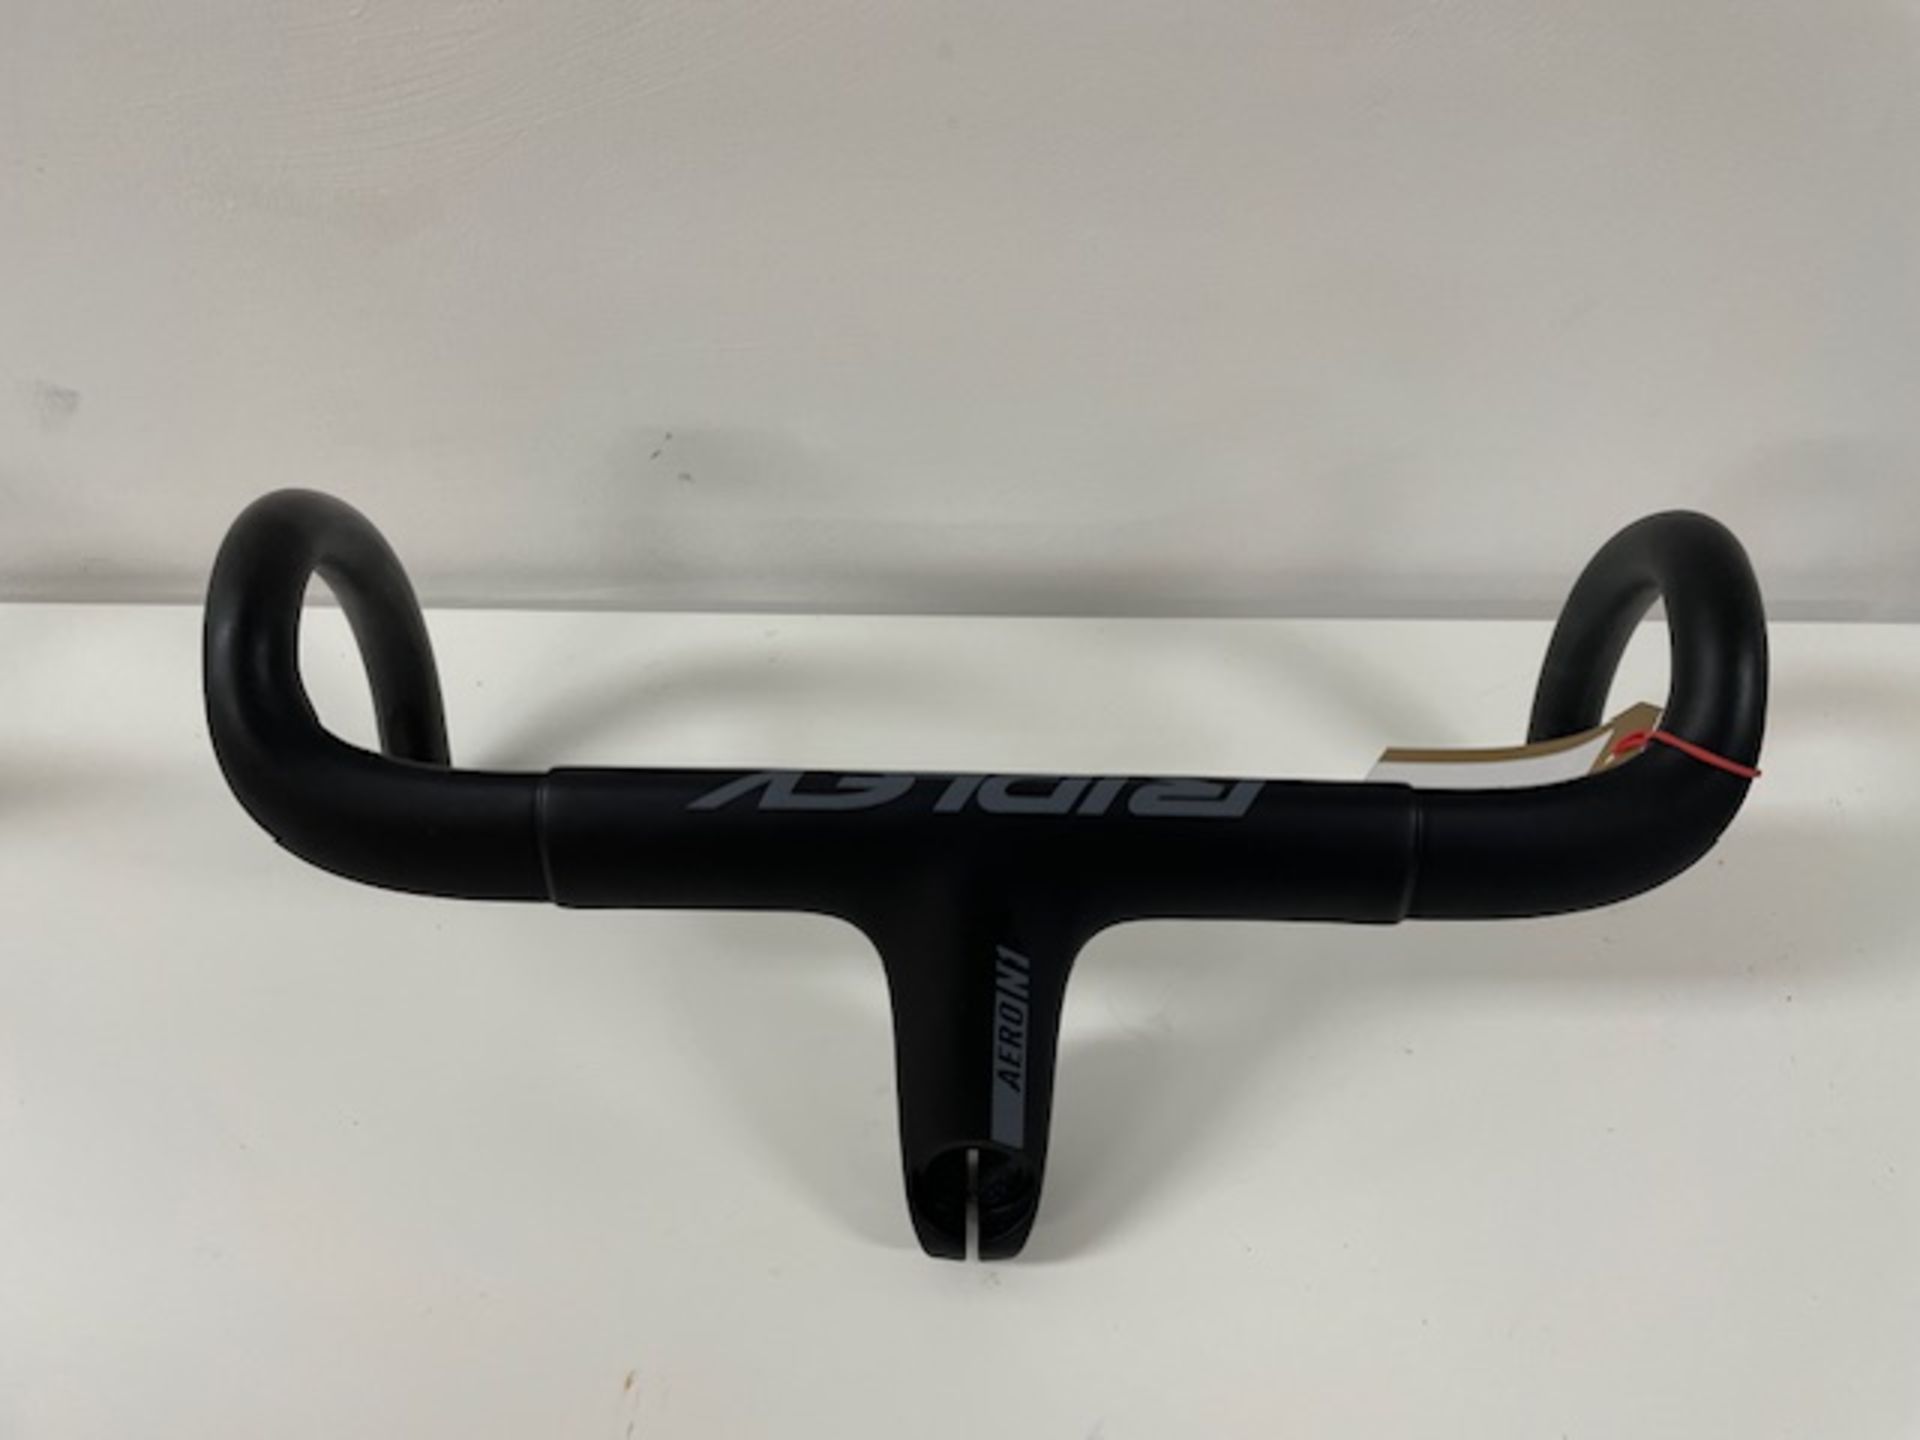 Ridley Aero N1, 400420/100 One Piece Carbon Handlebar (Location: Newport Pagnell. Please Refer to